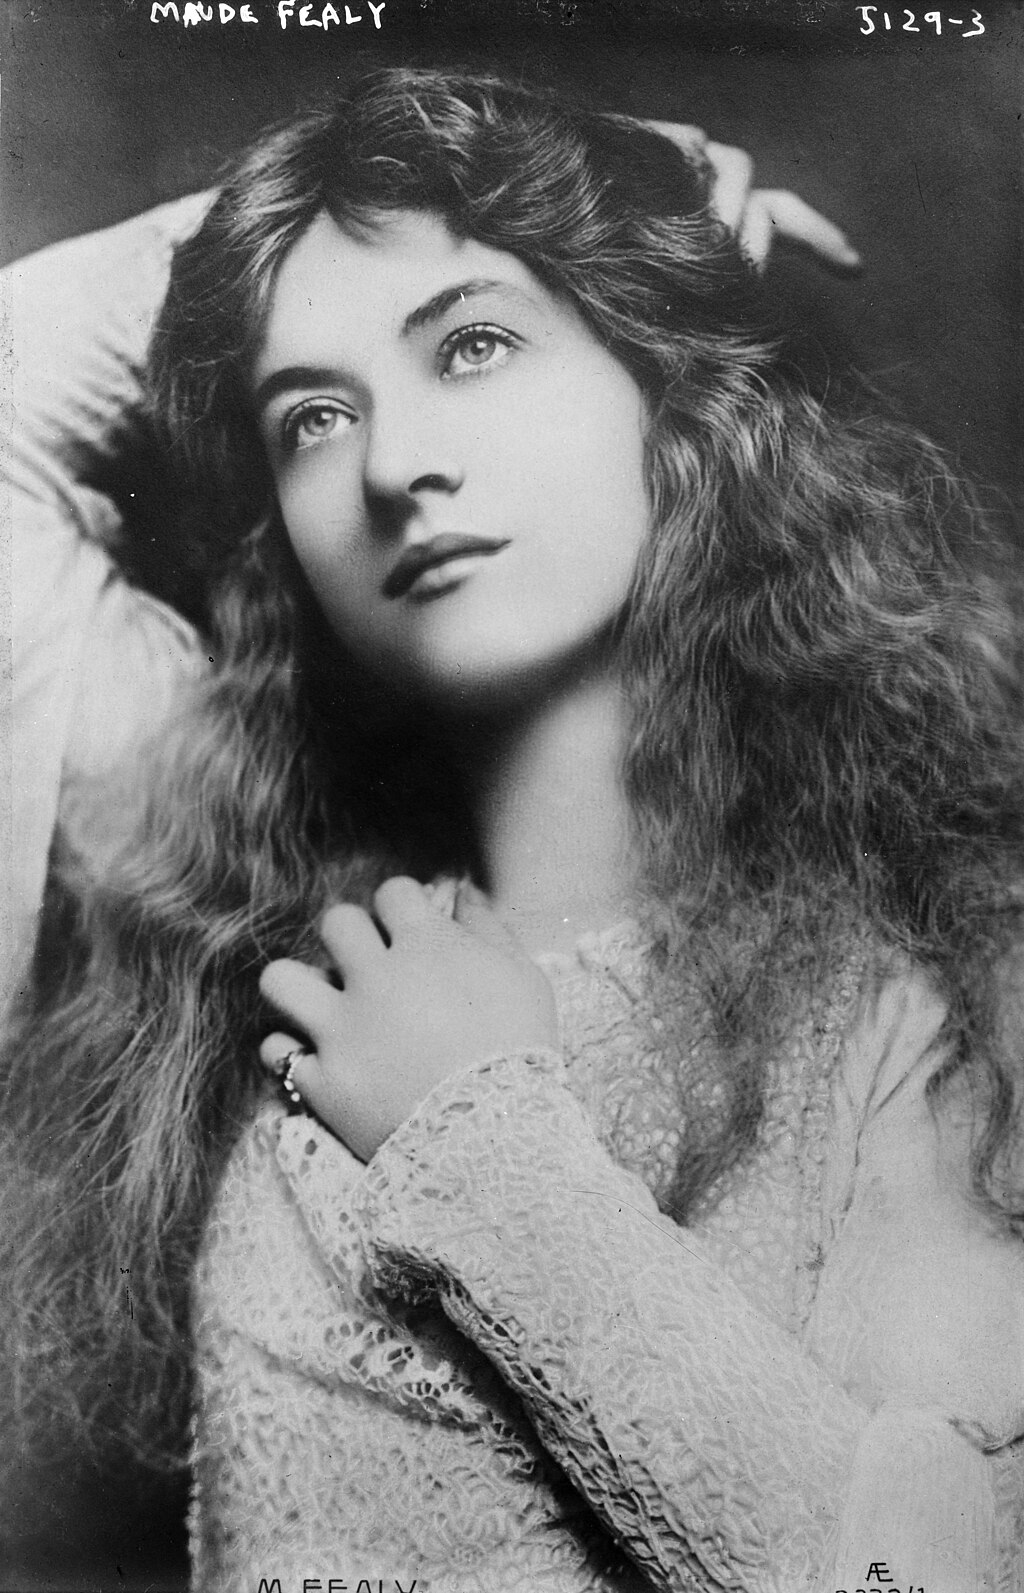 Maude Fealy, from LoC